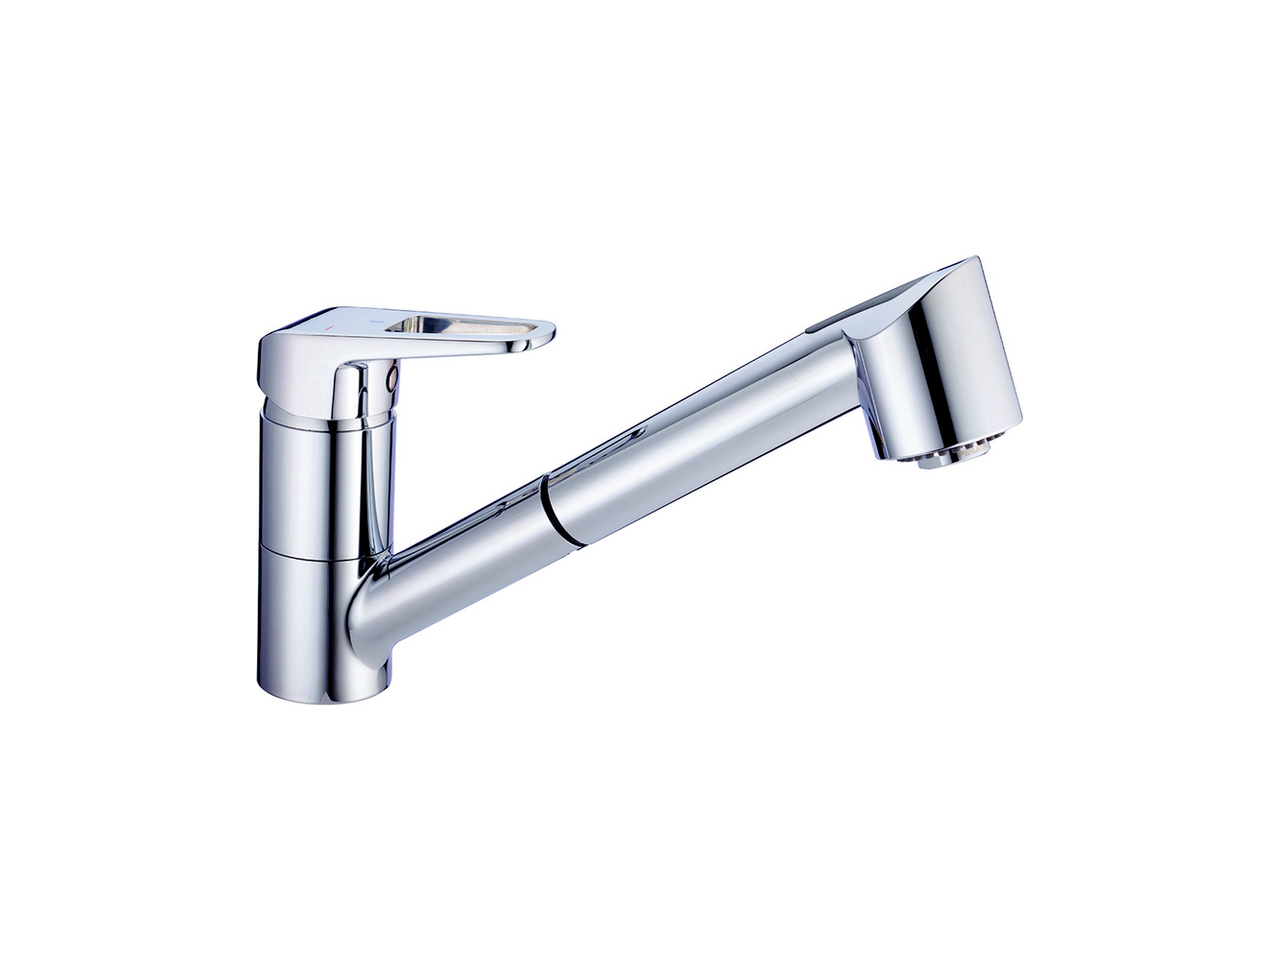 CisalSingle lever sink mixer ES with pull out handspray KITCHEN_PO002575